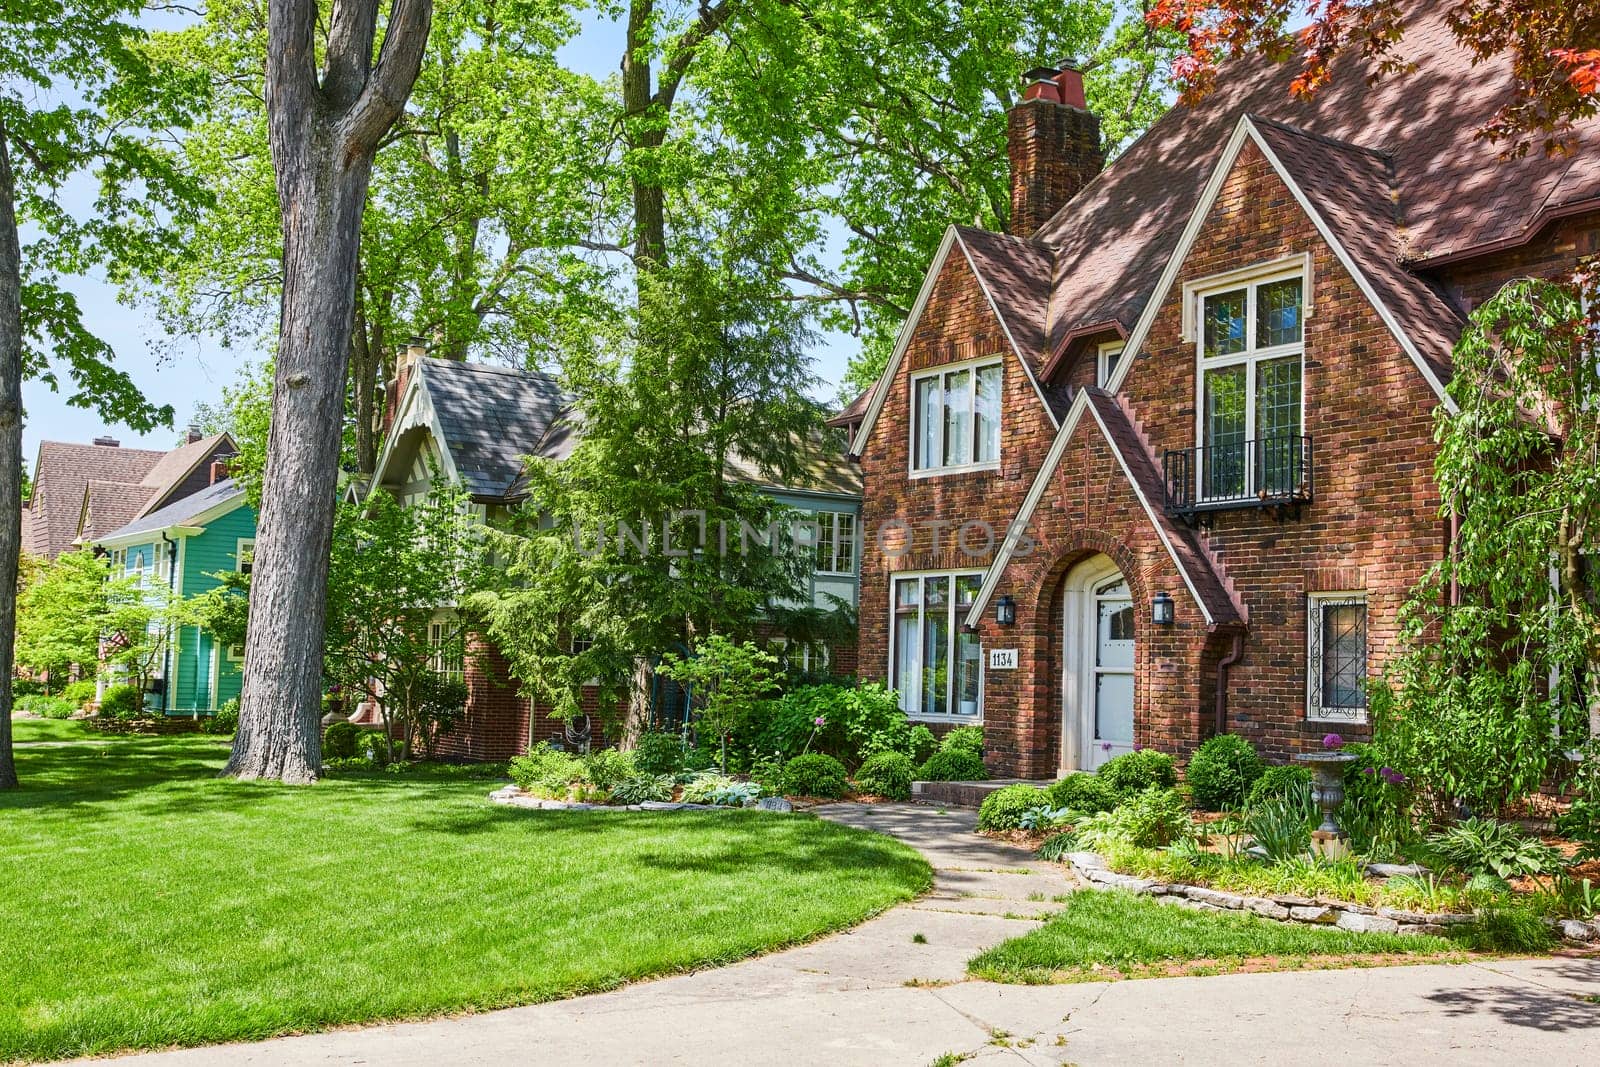 Idyllic suburban homes in Fort Wayne, Indiana, with lush greenery and vibrant architecture.